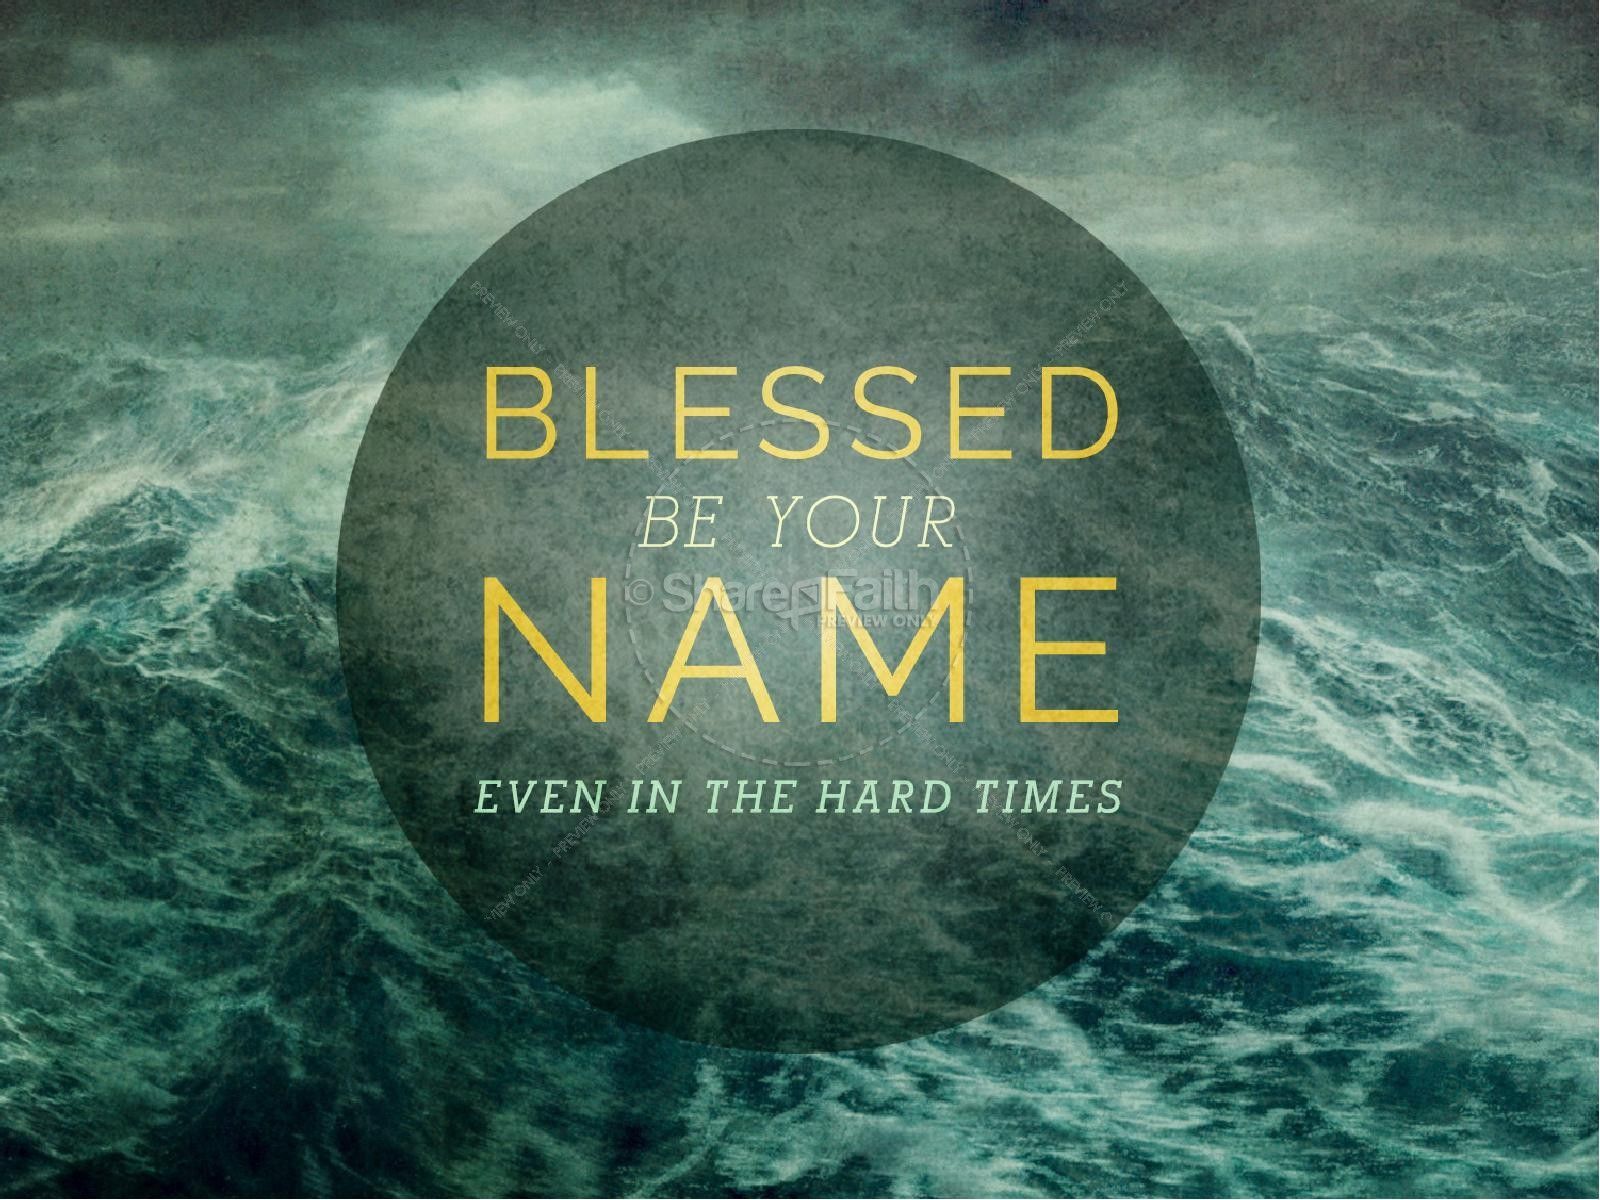 Name Blessing Wallpaper Free Name Blessing Background